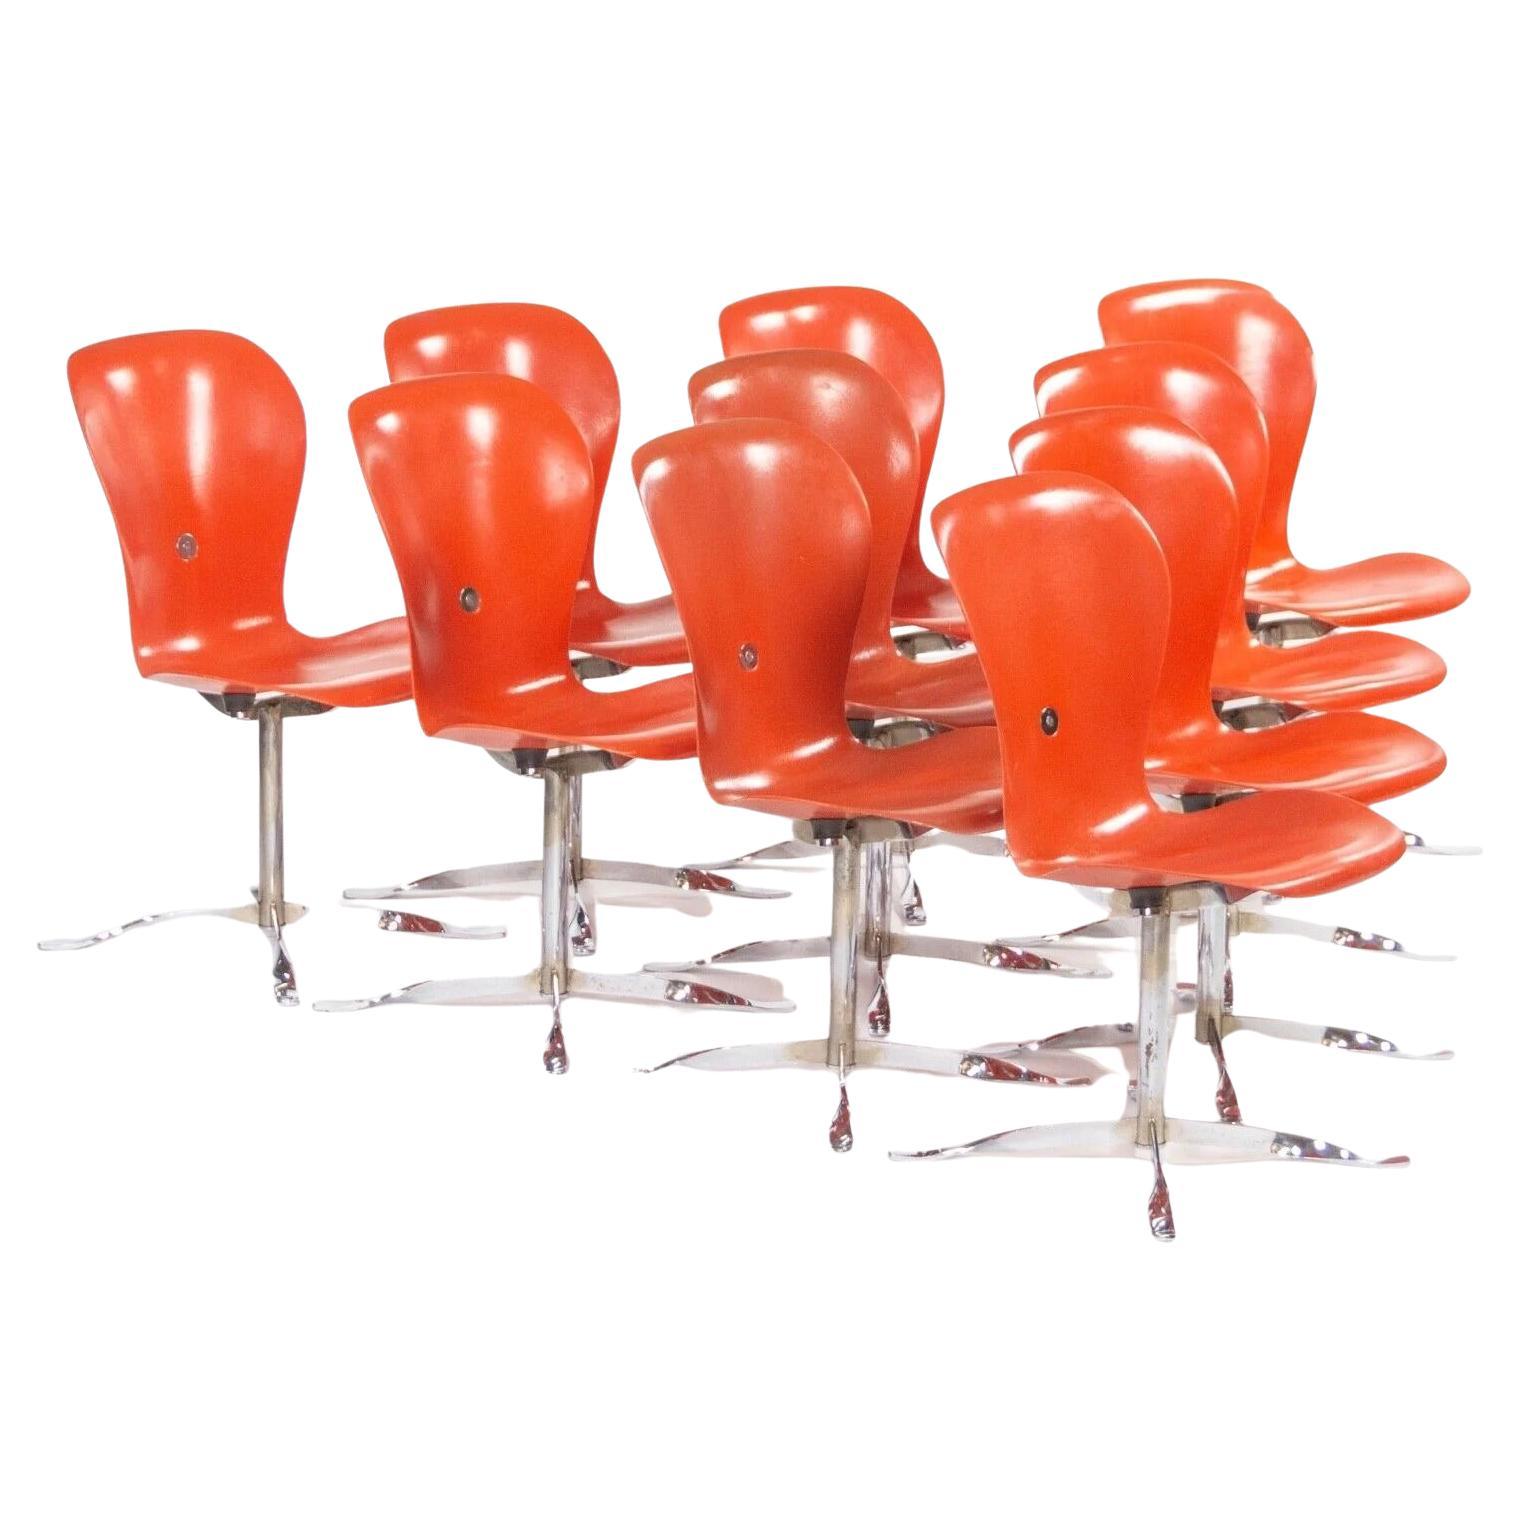 1974 Gideon Kramer Ion Chairs by American Desk Corp Fiberglass Sets Available For Sale